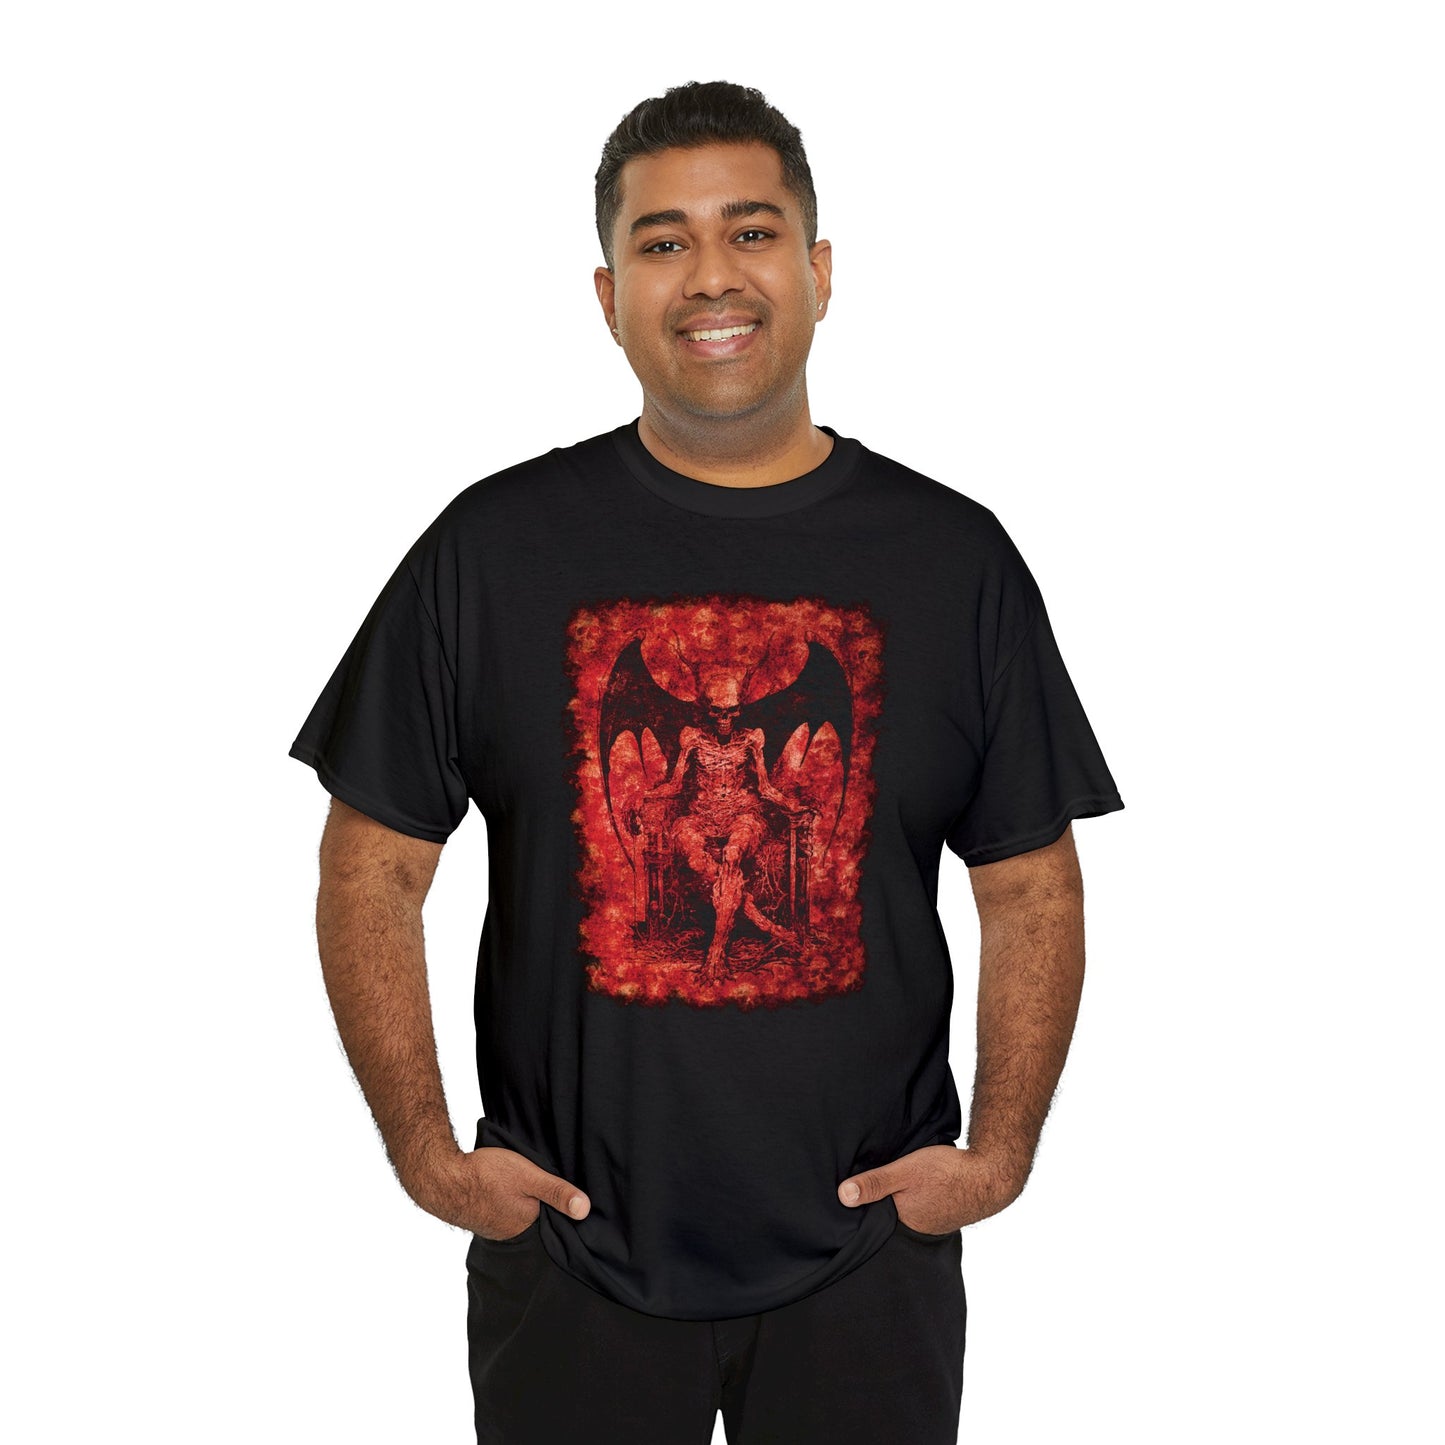 Unisex T-shirt Devil on his Throne in Red Square - Frogos Design